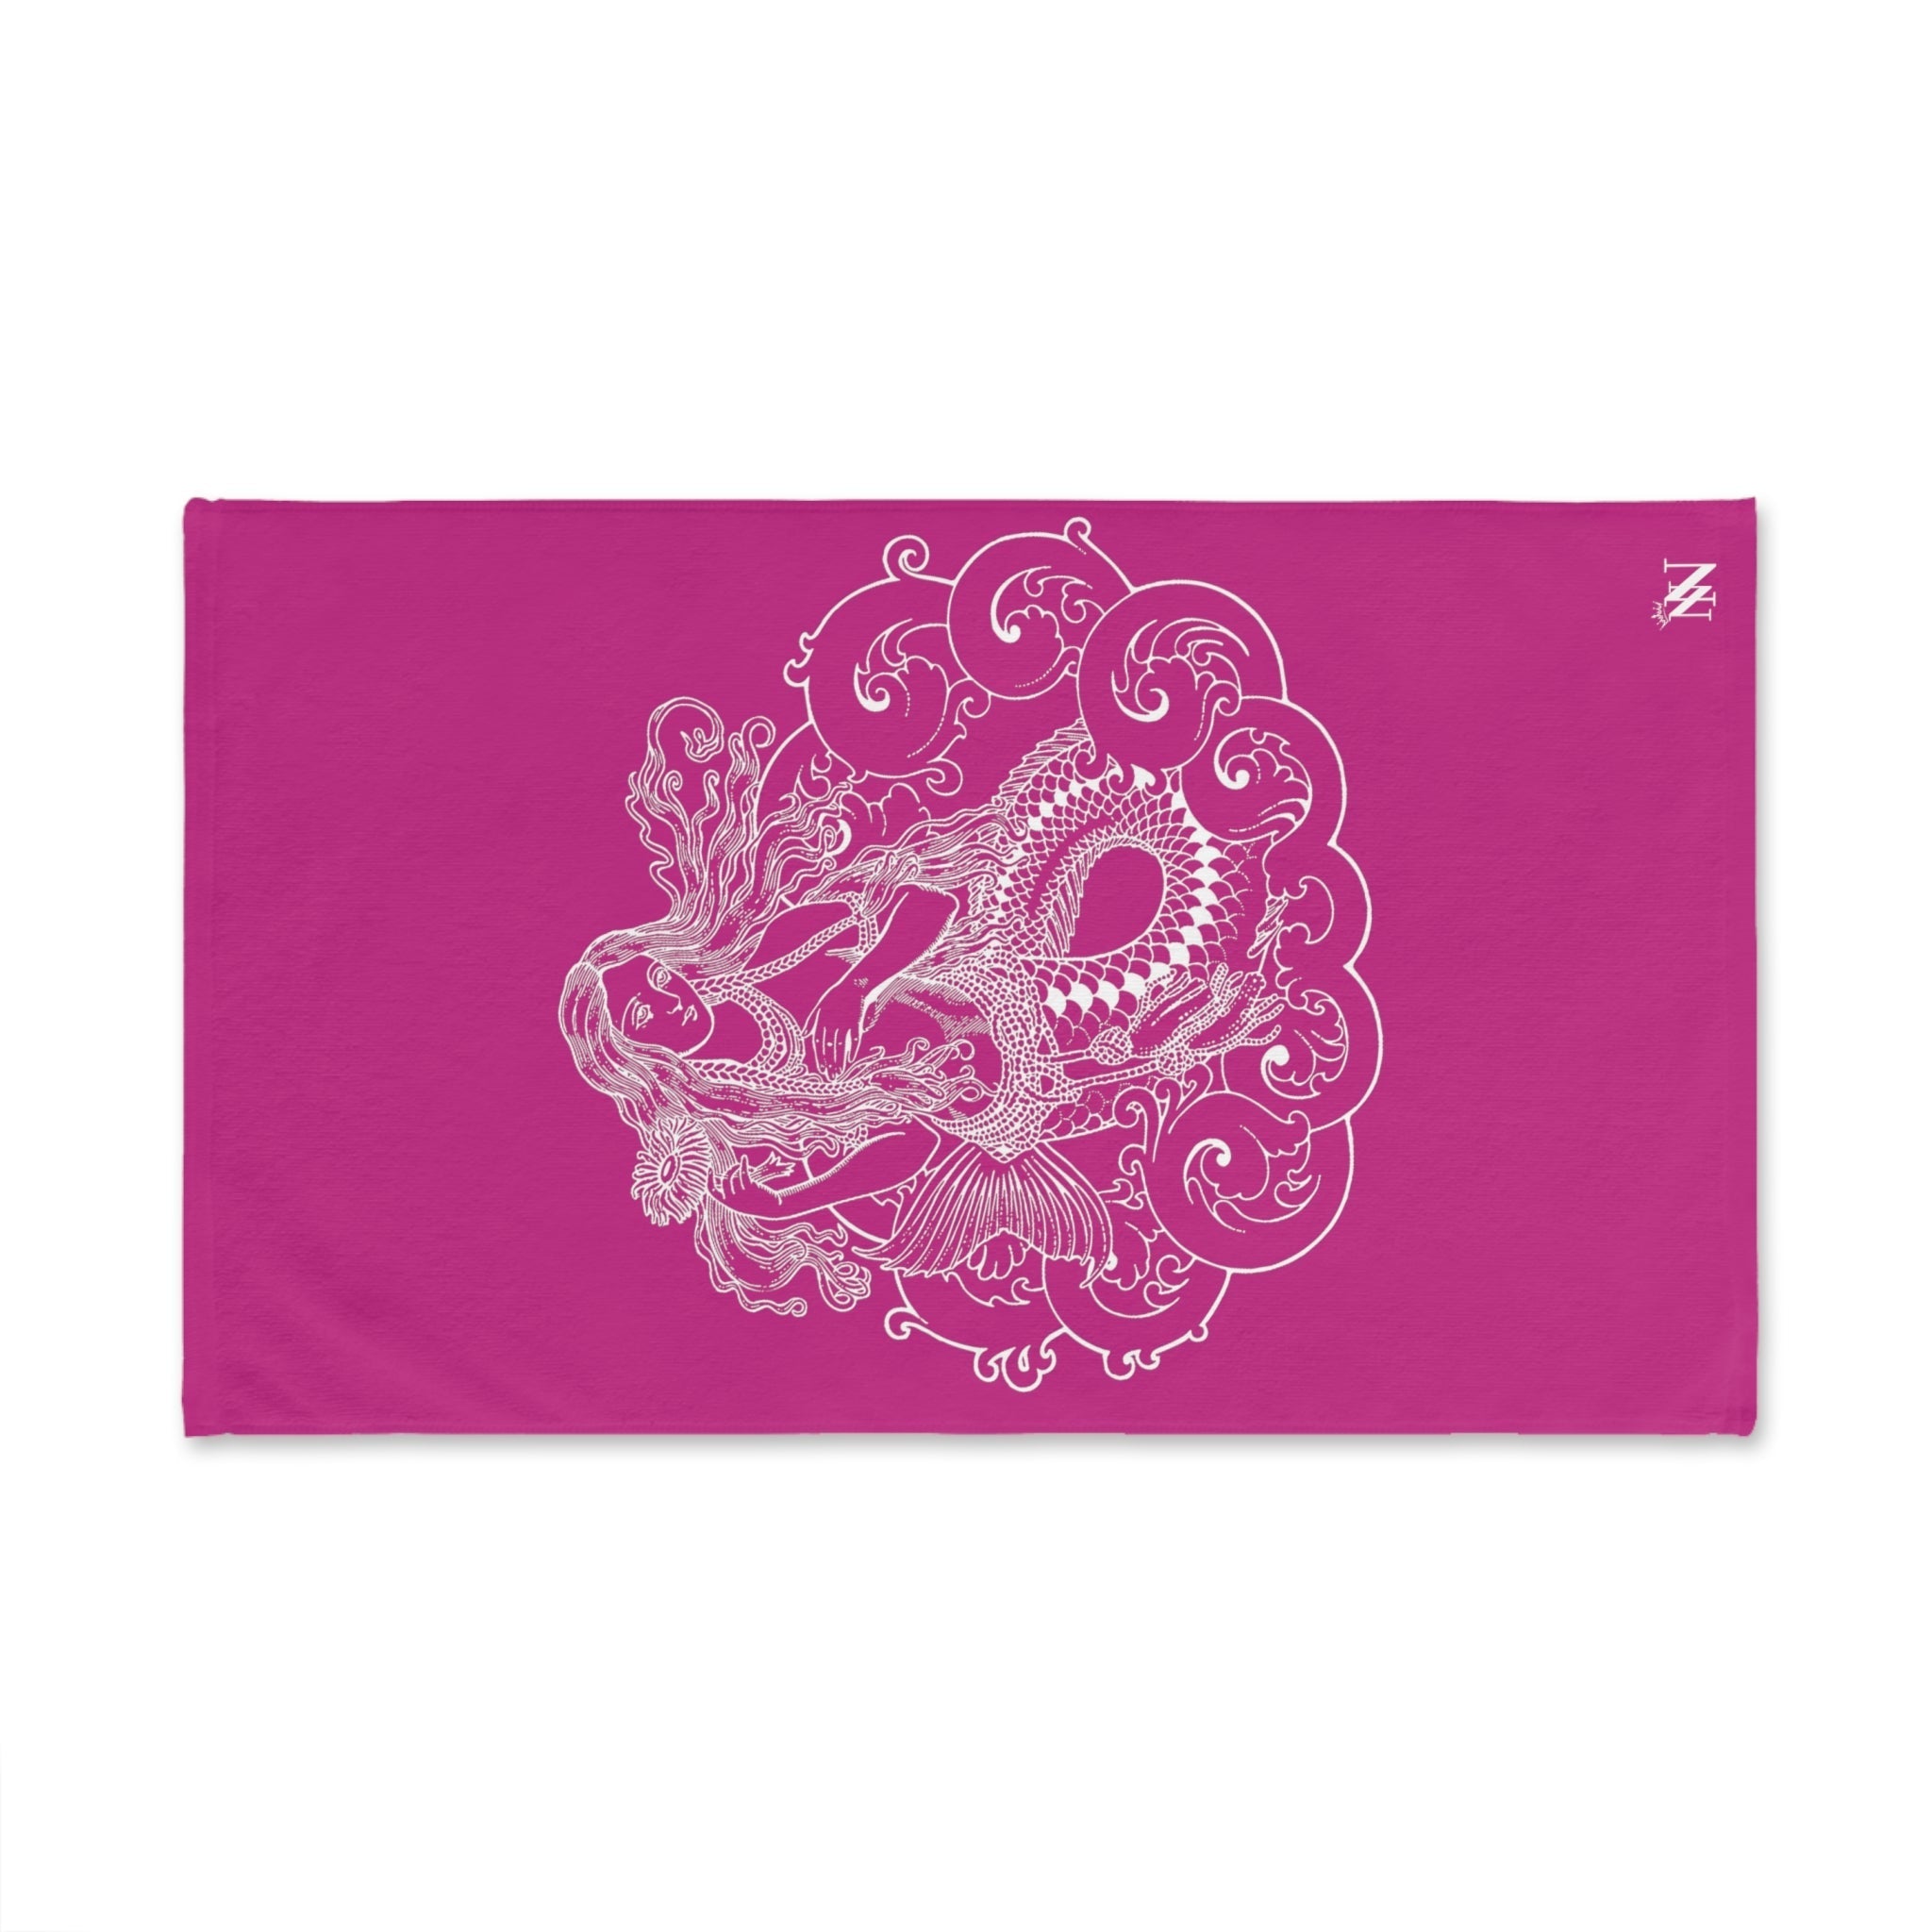 Wave Mermaid Sea Fuscia | Funny Gifts for Men - Gifts for Him - Birthday Gifts for Men, Him, Husband, Boyfriend, New Couple Gifts, Fathers & Valentines Day Gifts, Hand Towels NECTAR NAPKINS